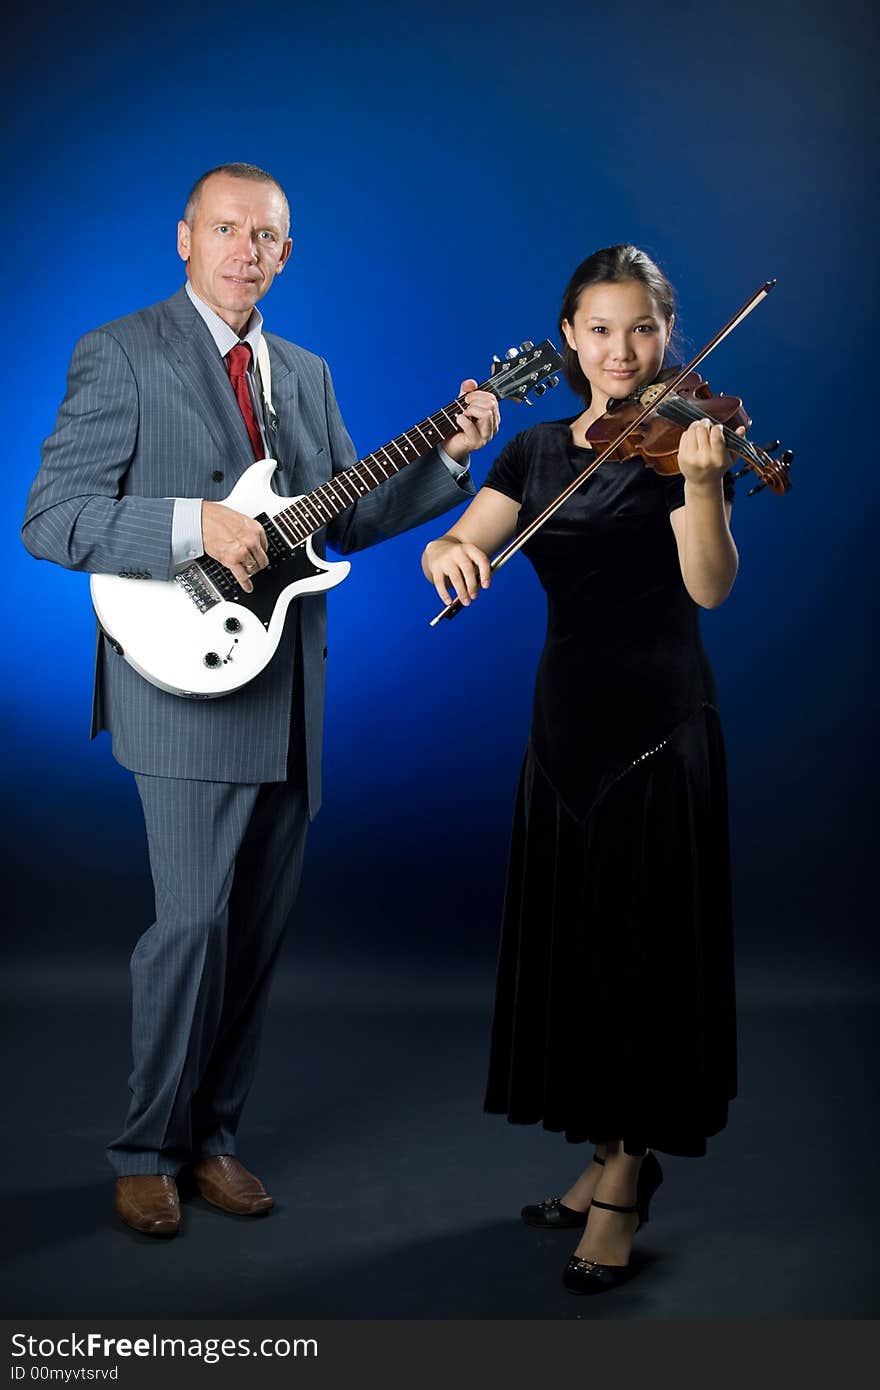 A photo of a duet - guitarist and violinist